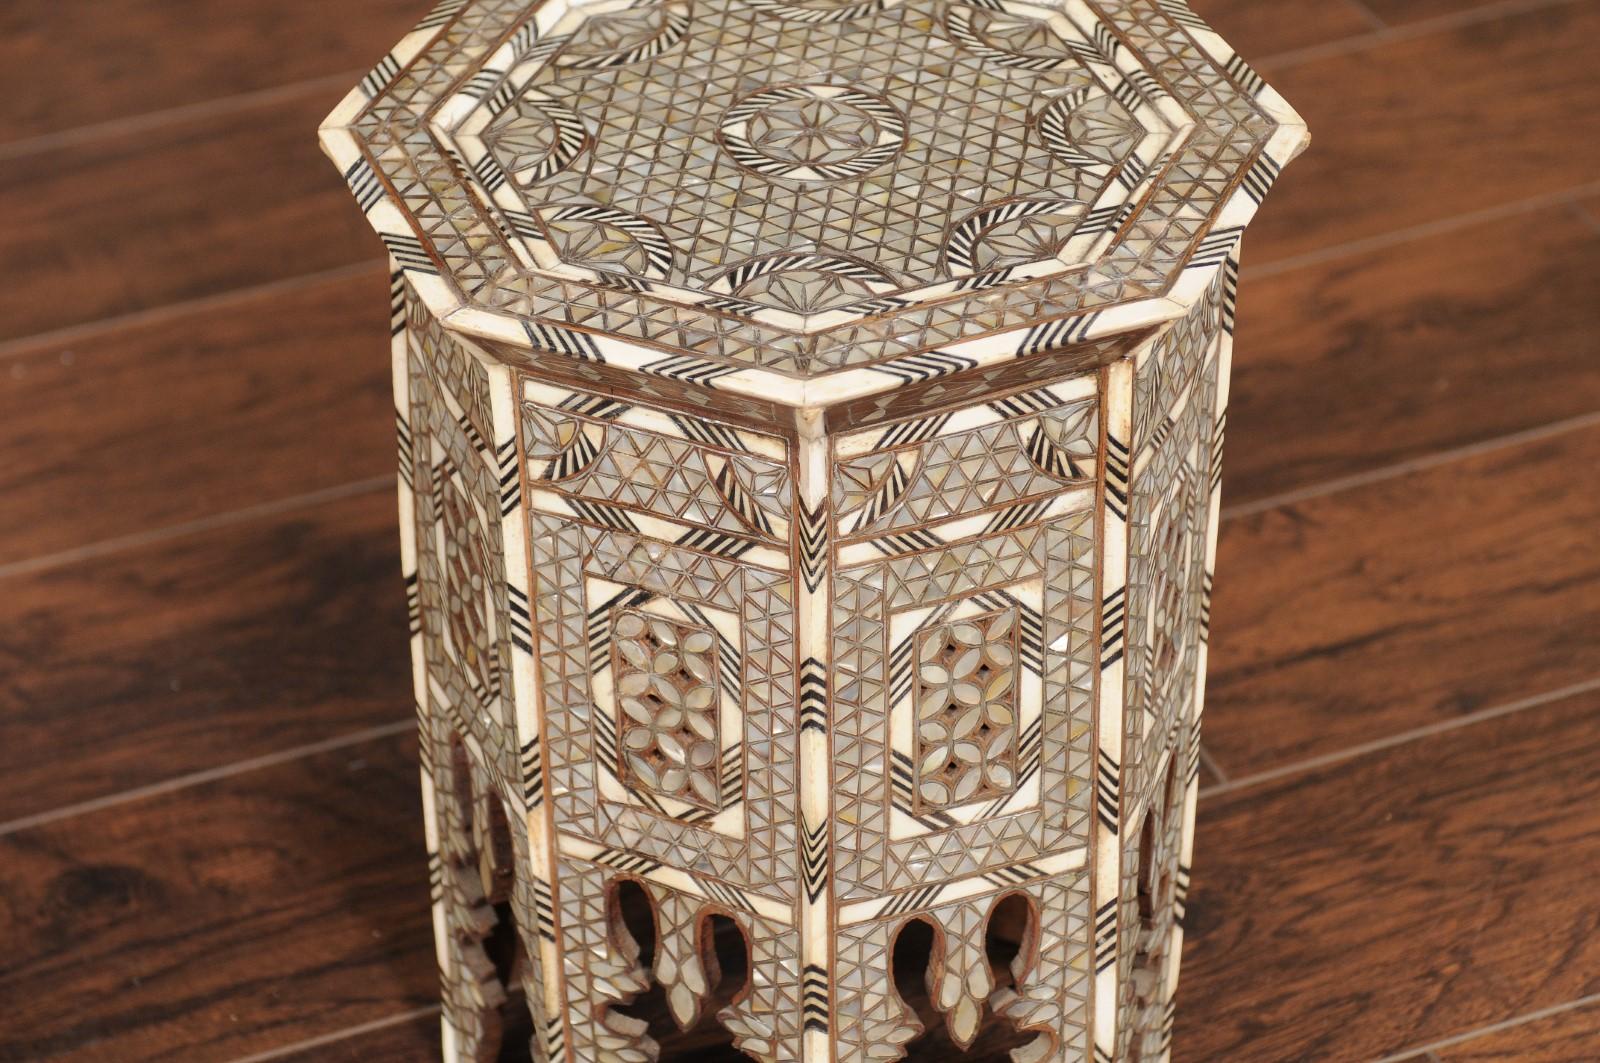 Syrian Moorish Style Hexagonal Side Table with Mother of Pearl and Bone Inlay 1